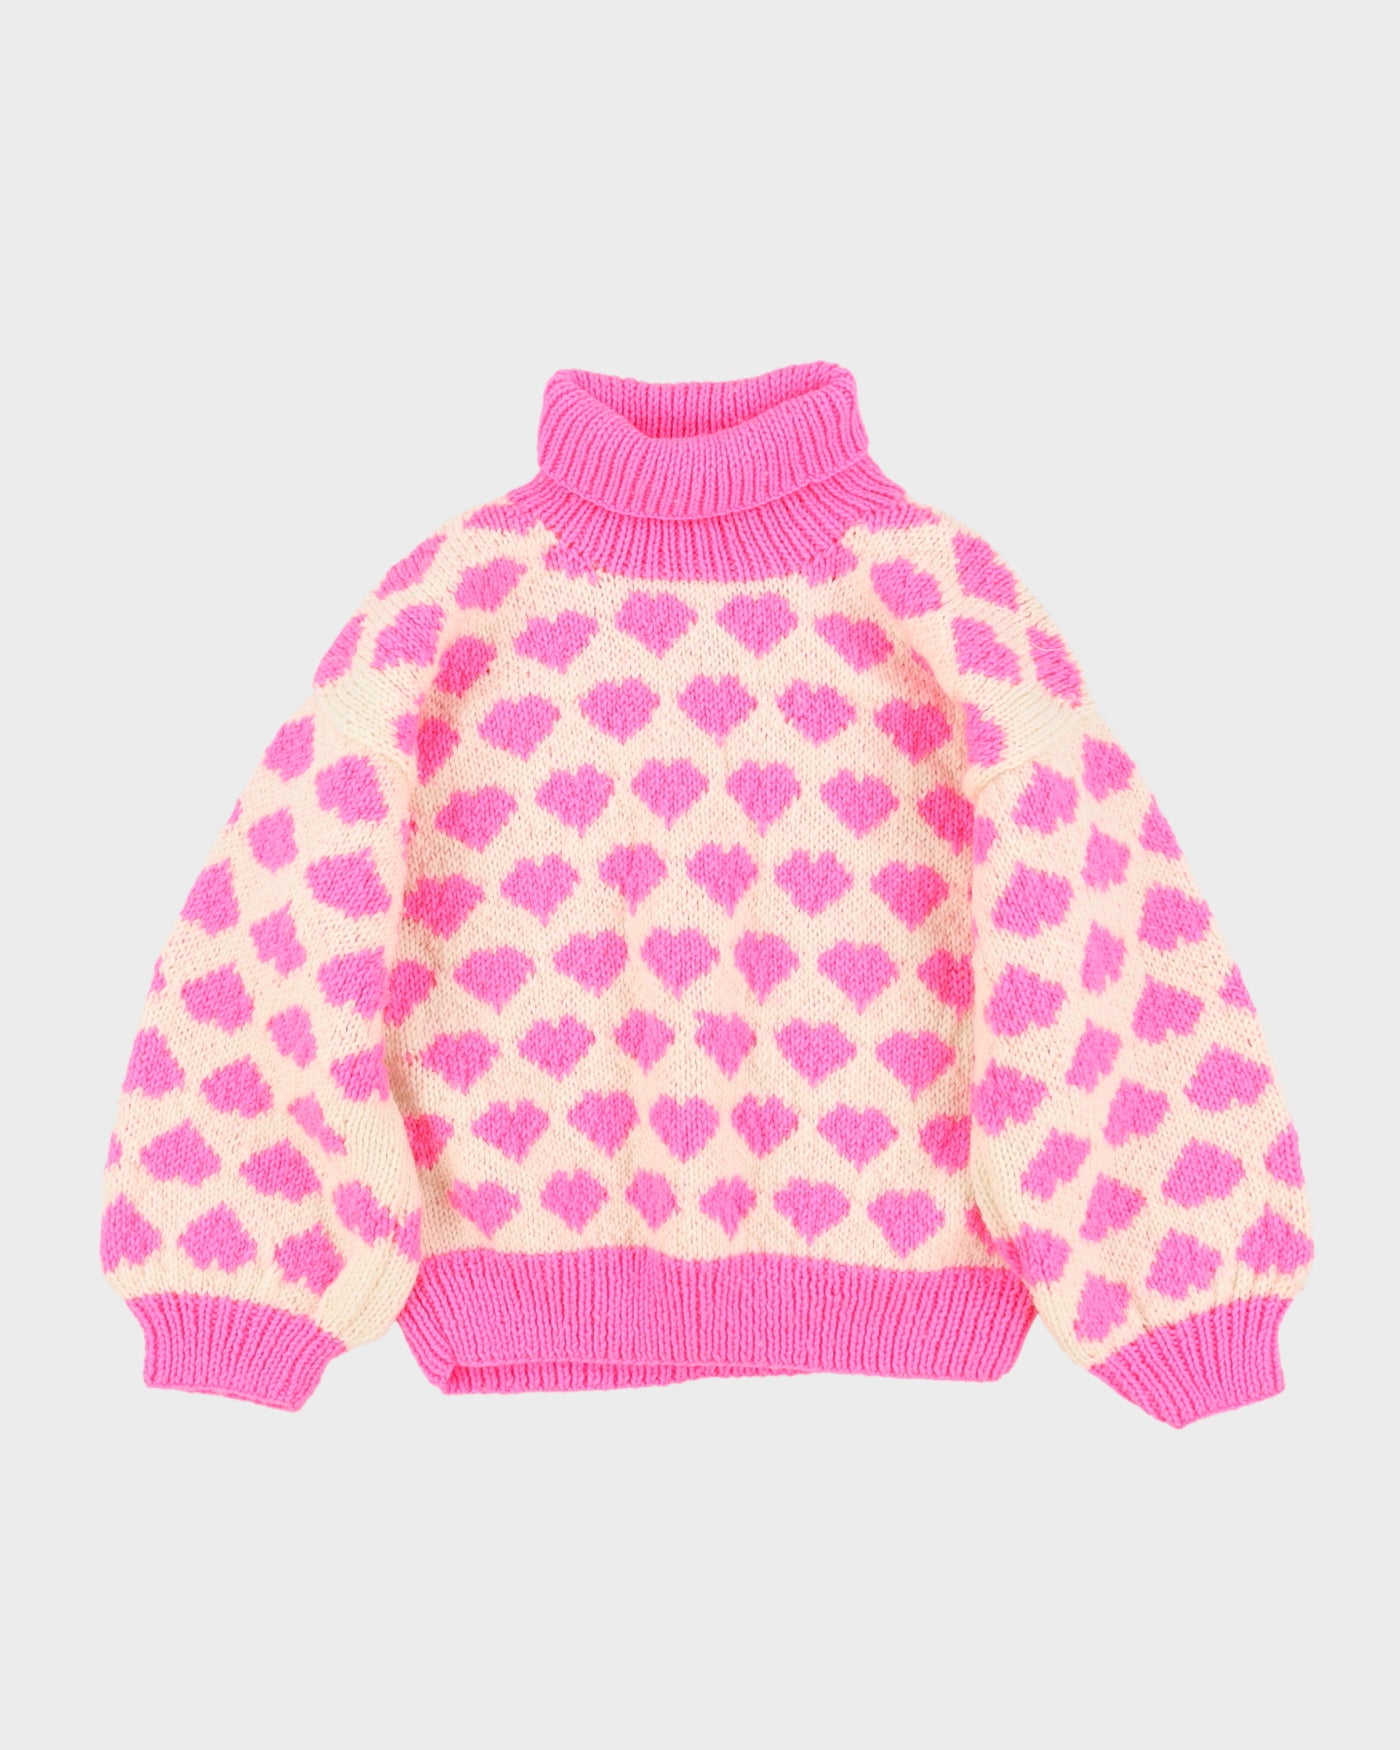 1980s Heart Patterned hand Knitted Jumper - S